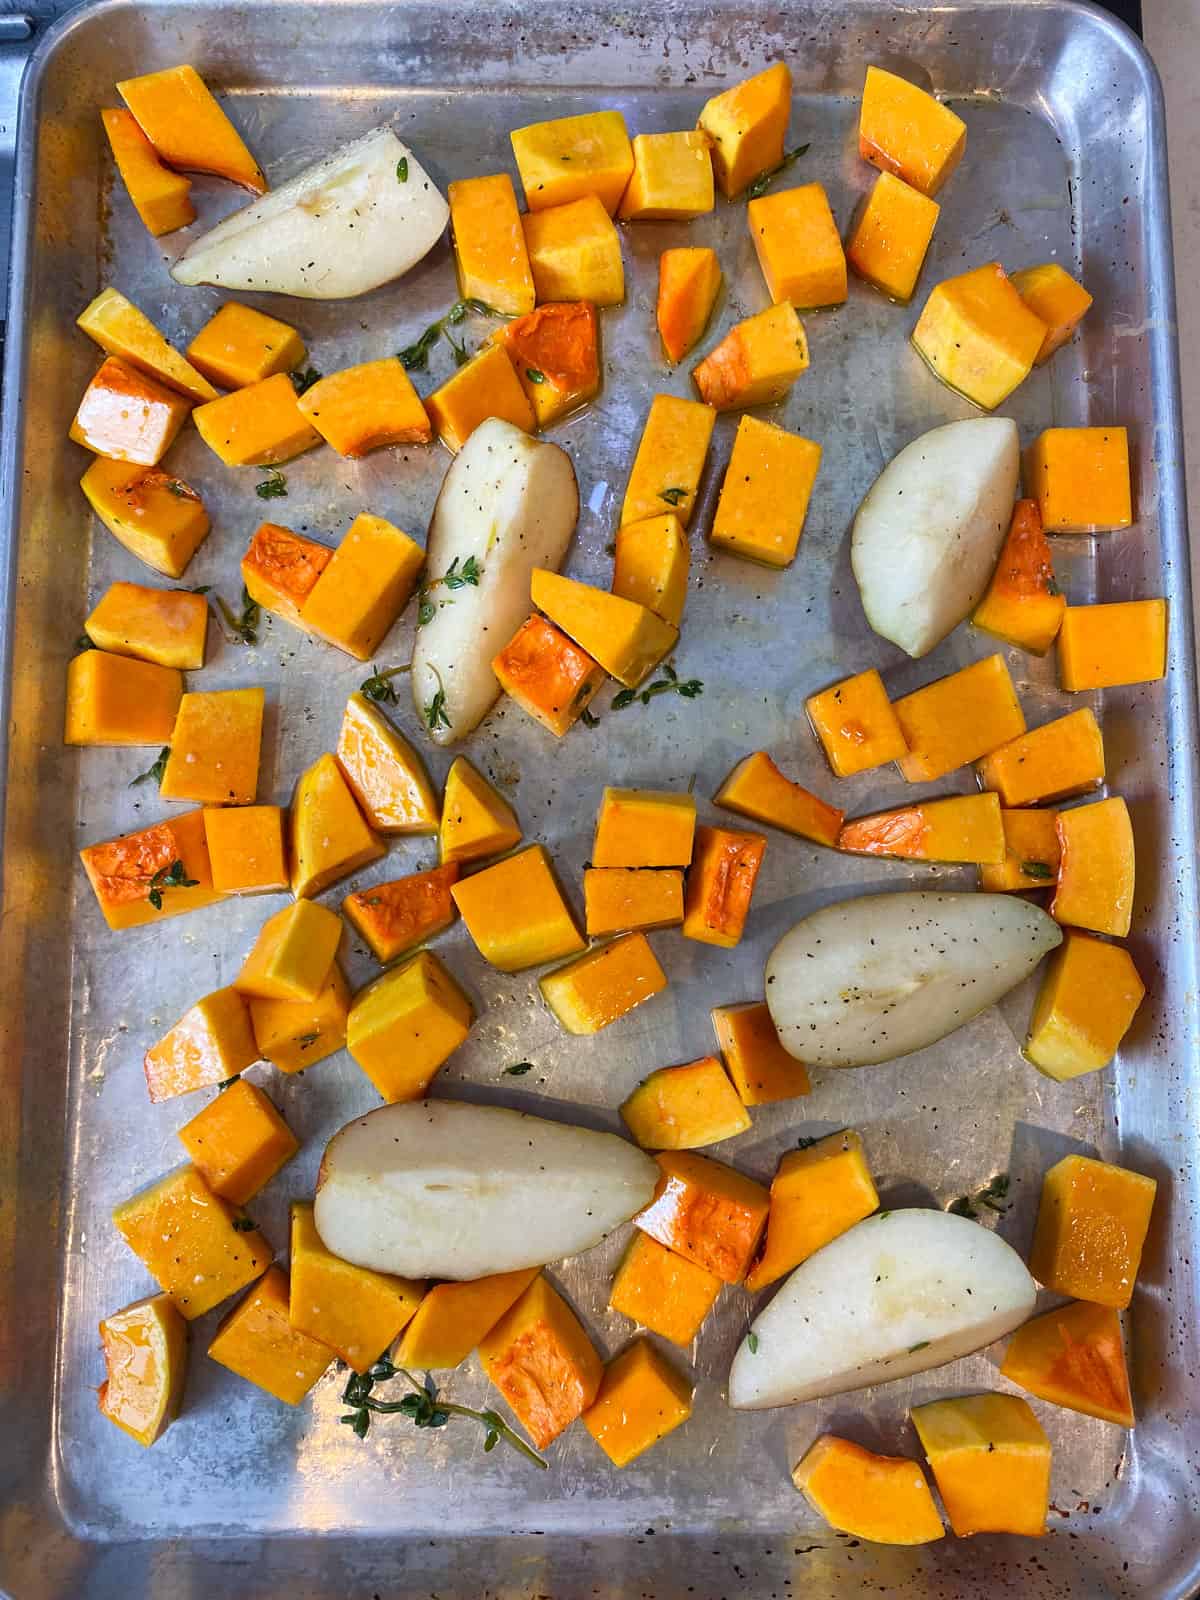 Add cubed butternut squash, pears and thyme onto a baking sheet and drizzle with olive oil.